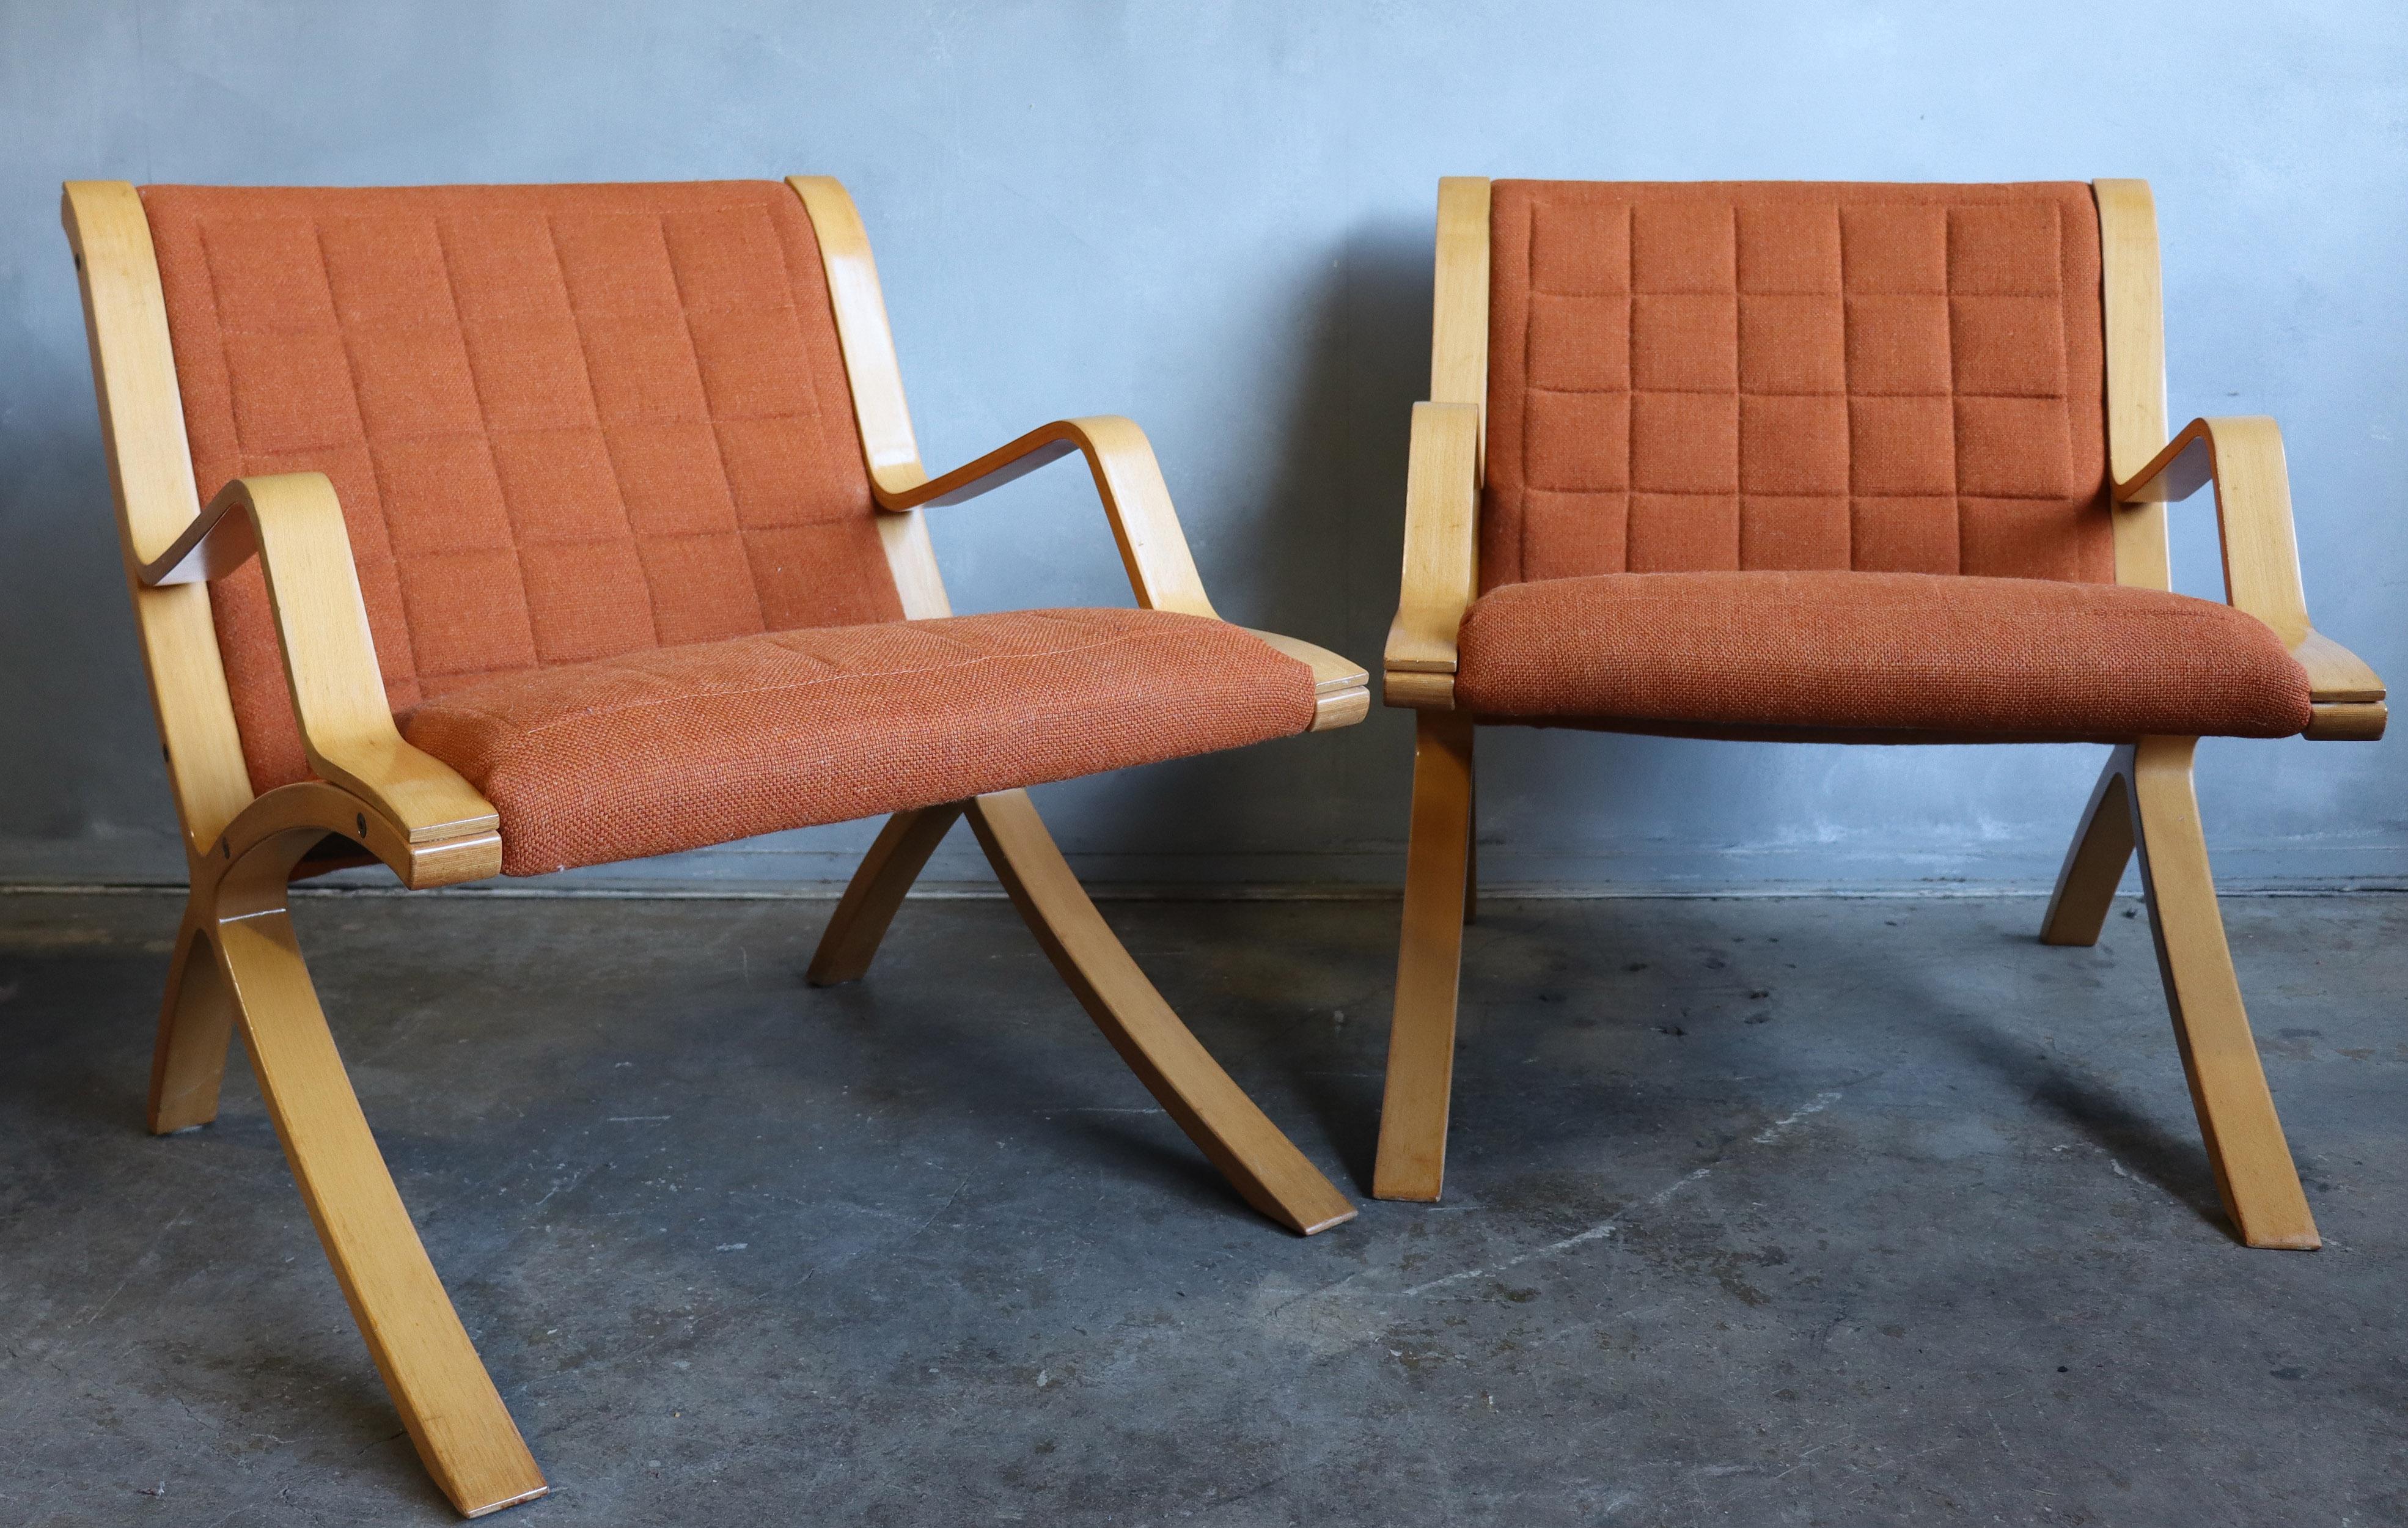 For your consideration are these spectacular Ax lounge chairs in original condition featuring bent wood frames and original burn orange tufted wool upholstery. Very comfortable and striking design.